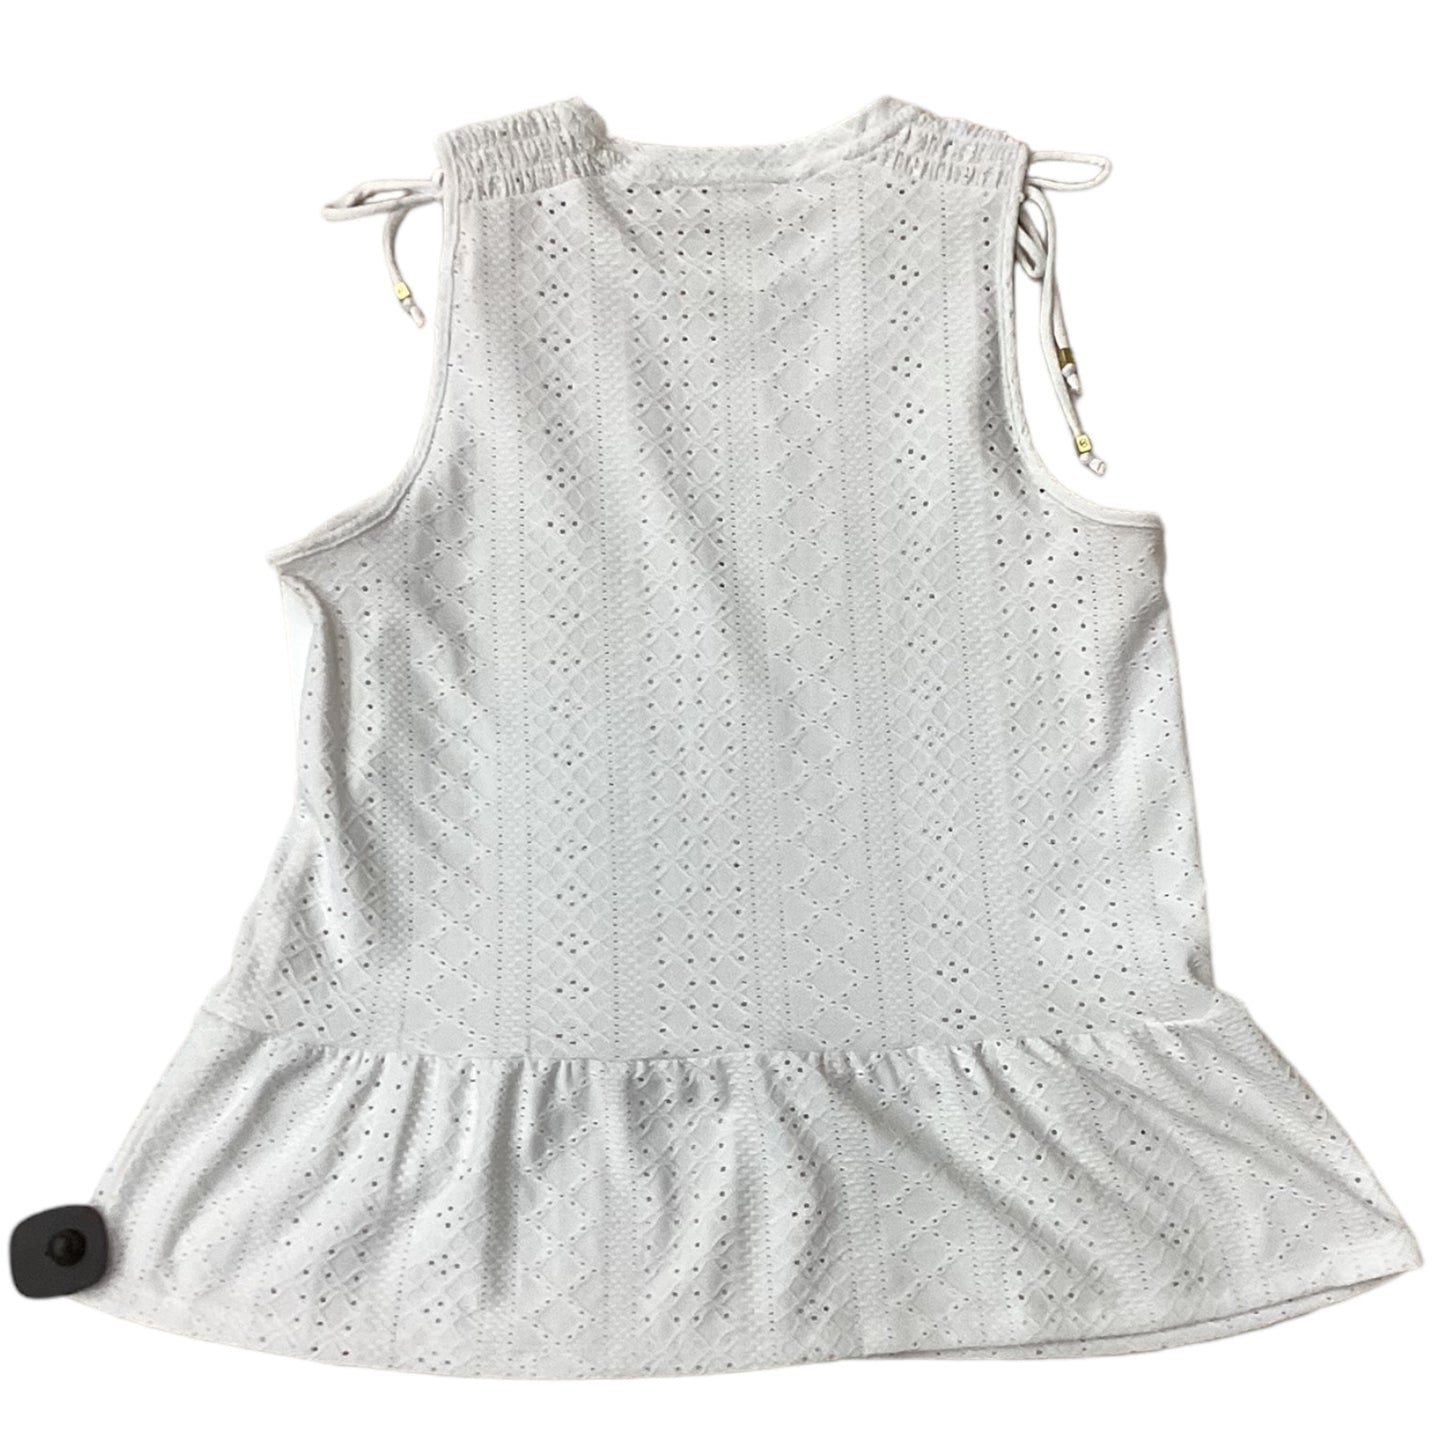 Top Sleeveless By Michael Kors  Size: S